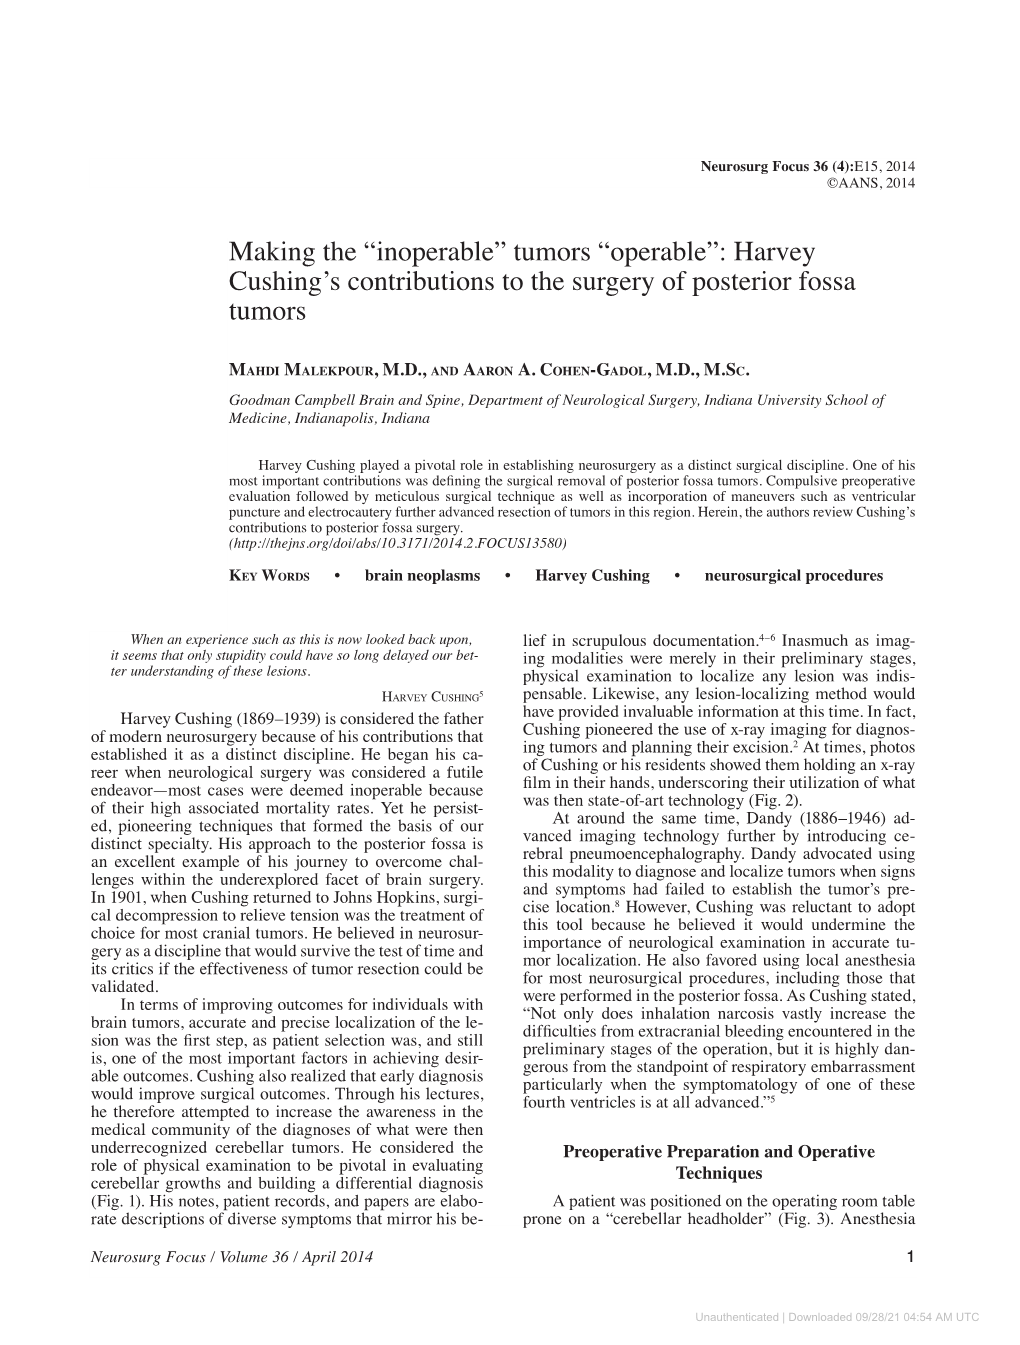 Harvey Cushing's Contributions to the Surgery of Posterior Fossa Tumors